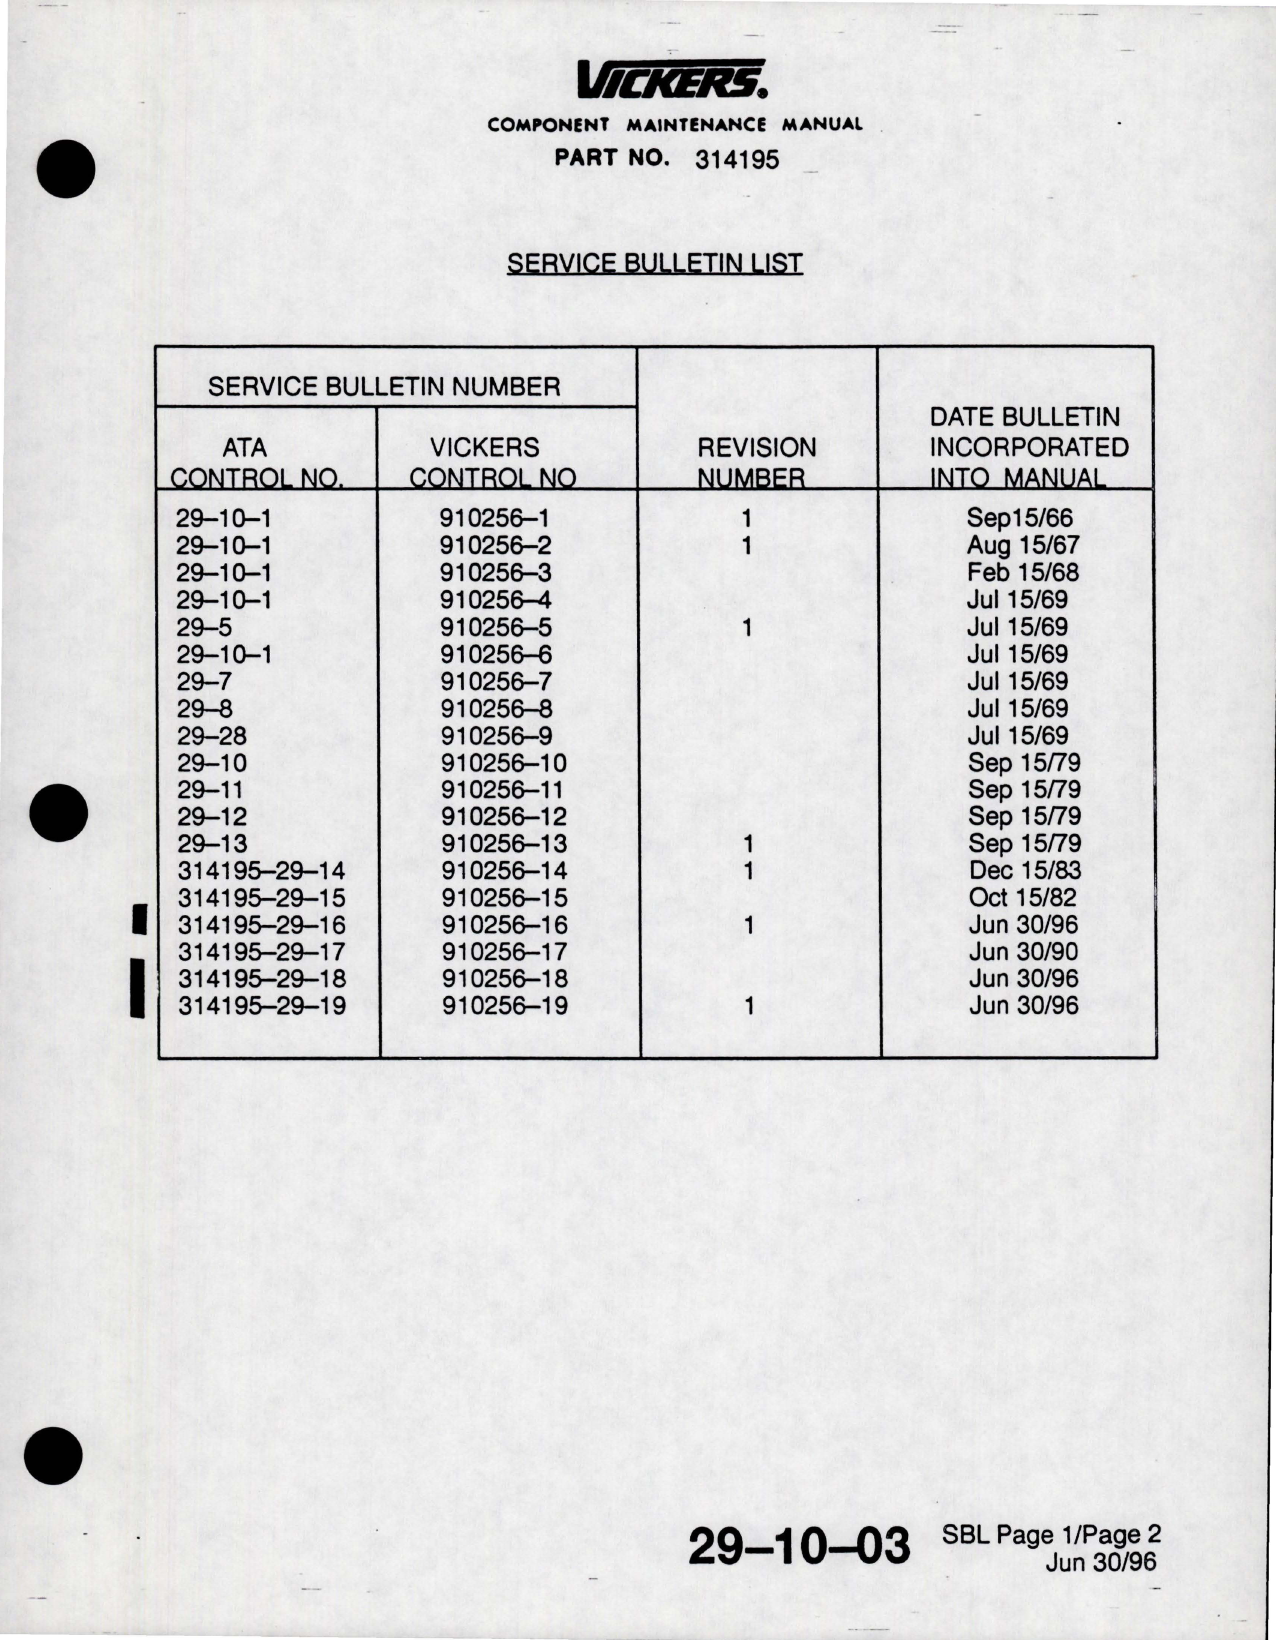 Sample page 7 from AirCorps Library document: Maintenance Manual with Parts List for Variable Displacement Hydraulic Pump Assembly - Model AS66411-L-S666 (Vickers